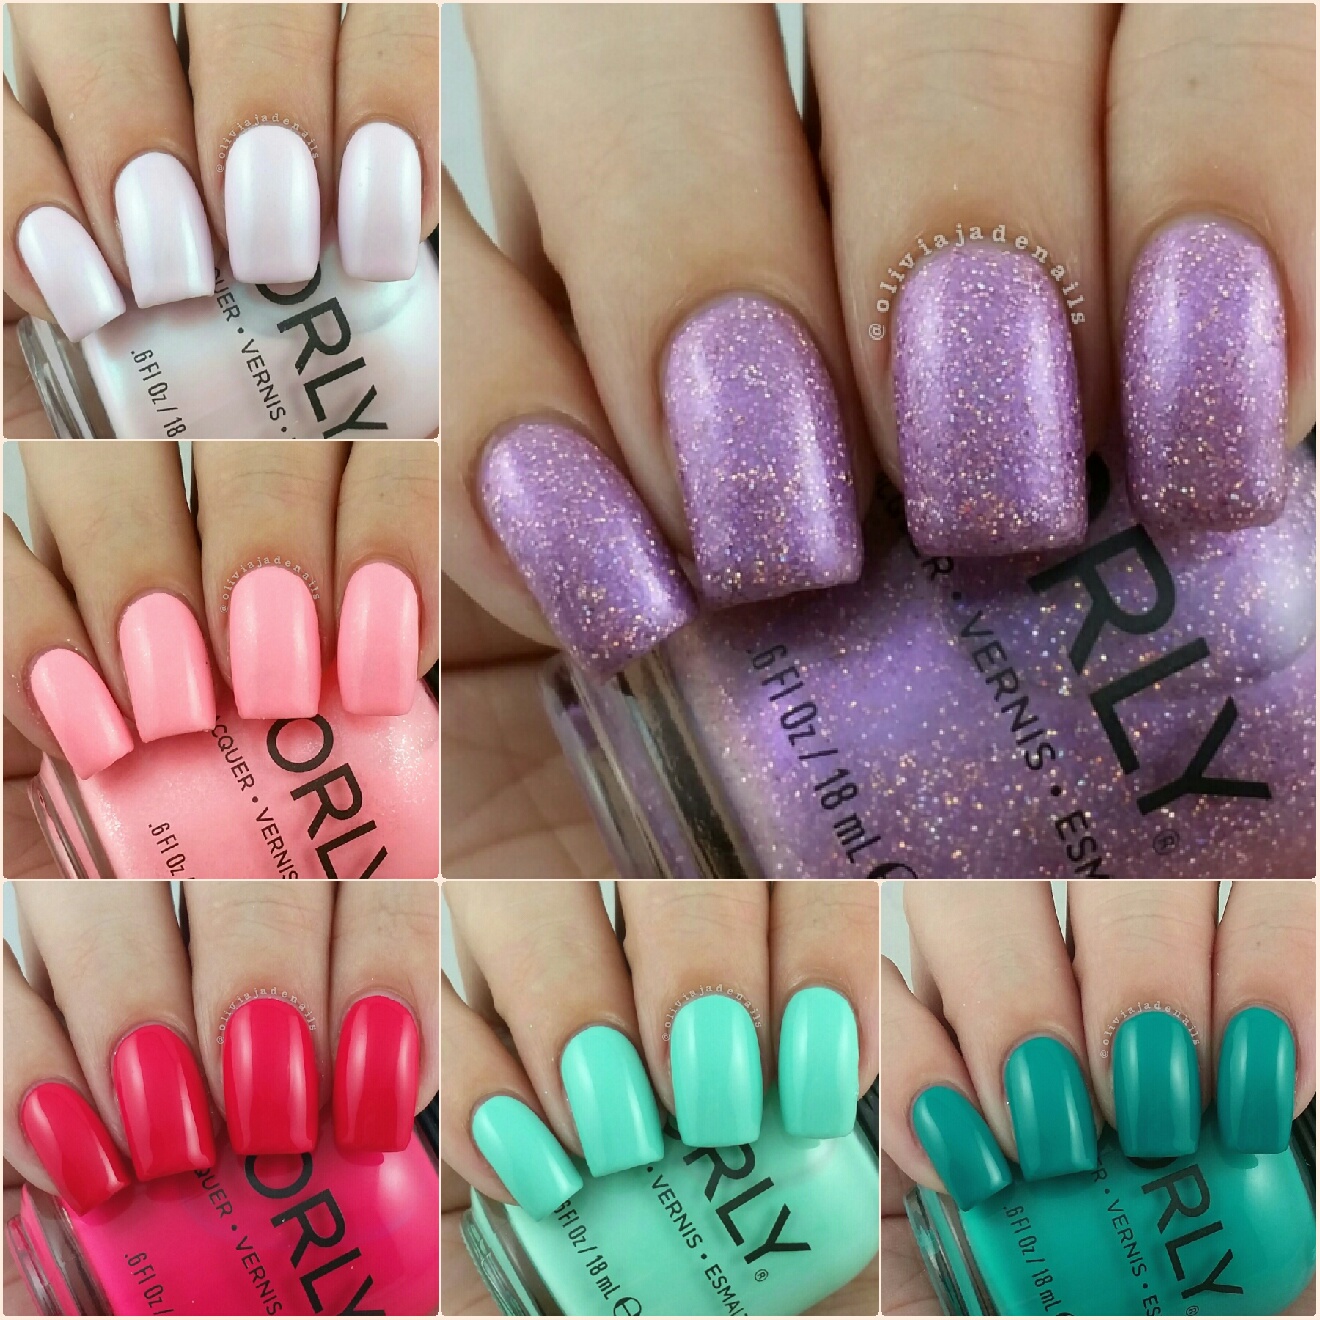 ORLY Valentine's Day 2012 Collection Review, Swatches and Photos - Fables  in Fashion